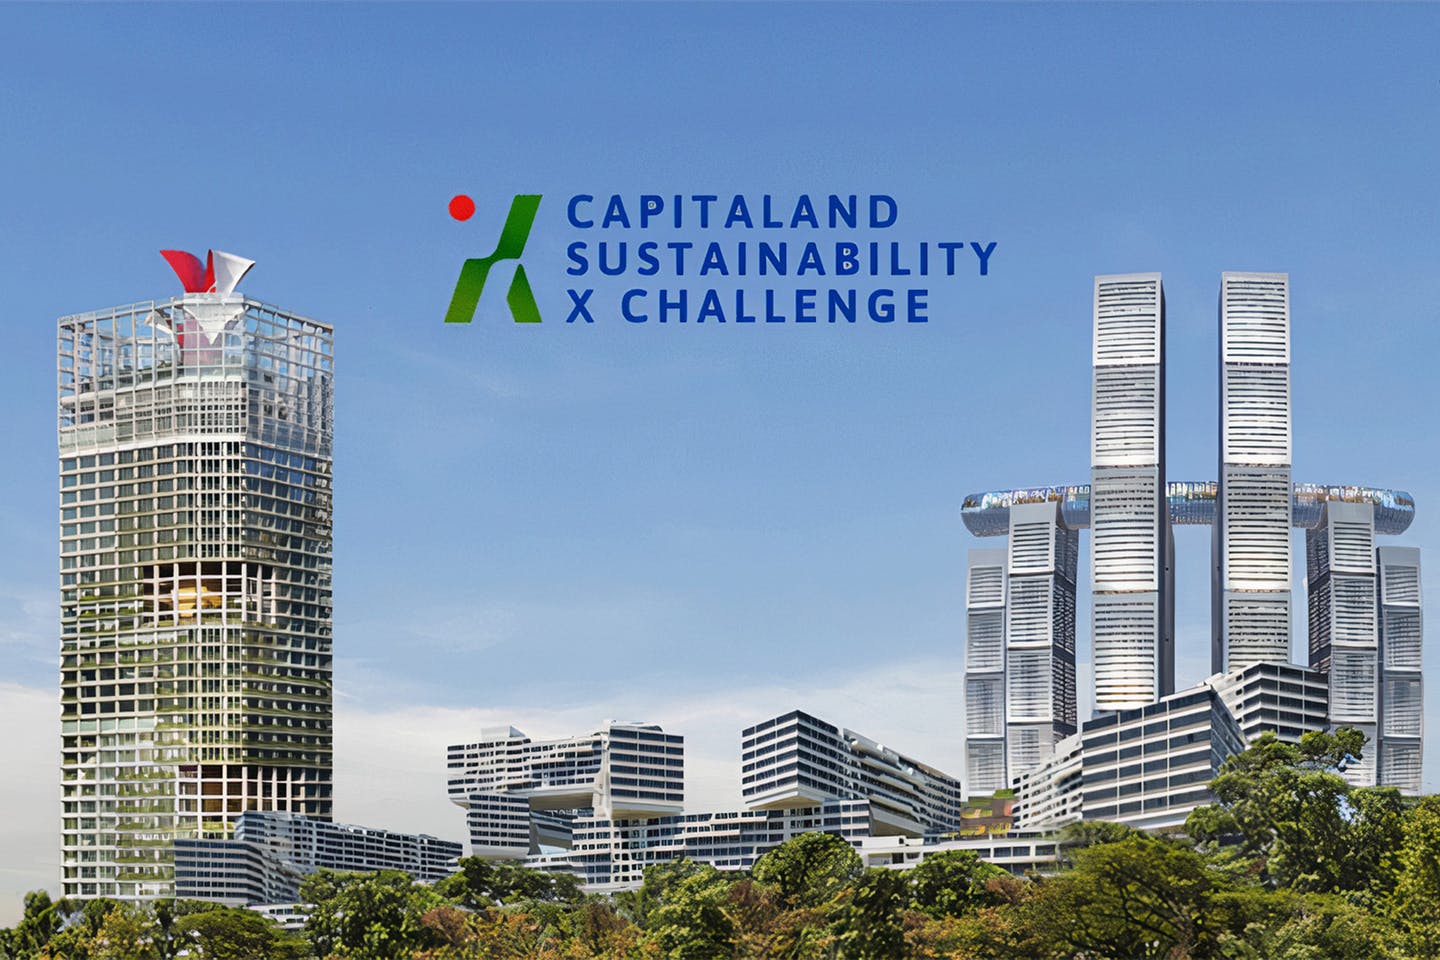 Join CapitaLand’s first global built environment-focused innovation challenge